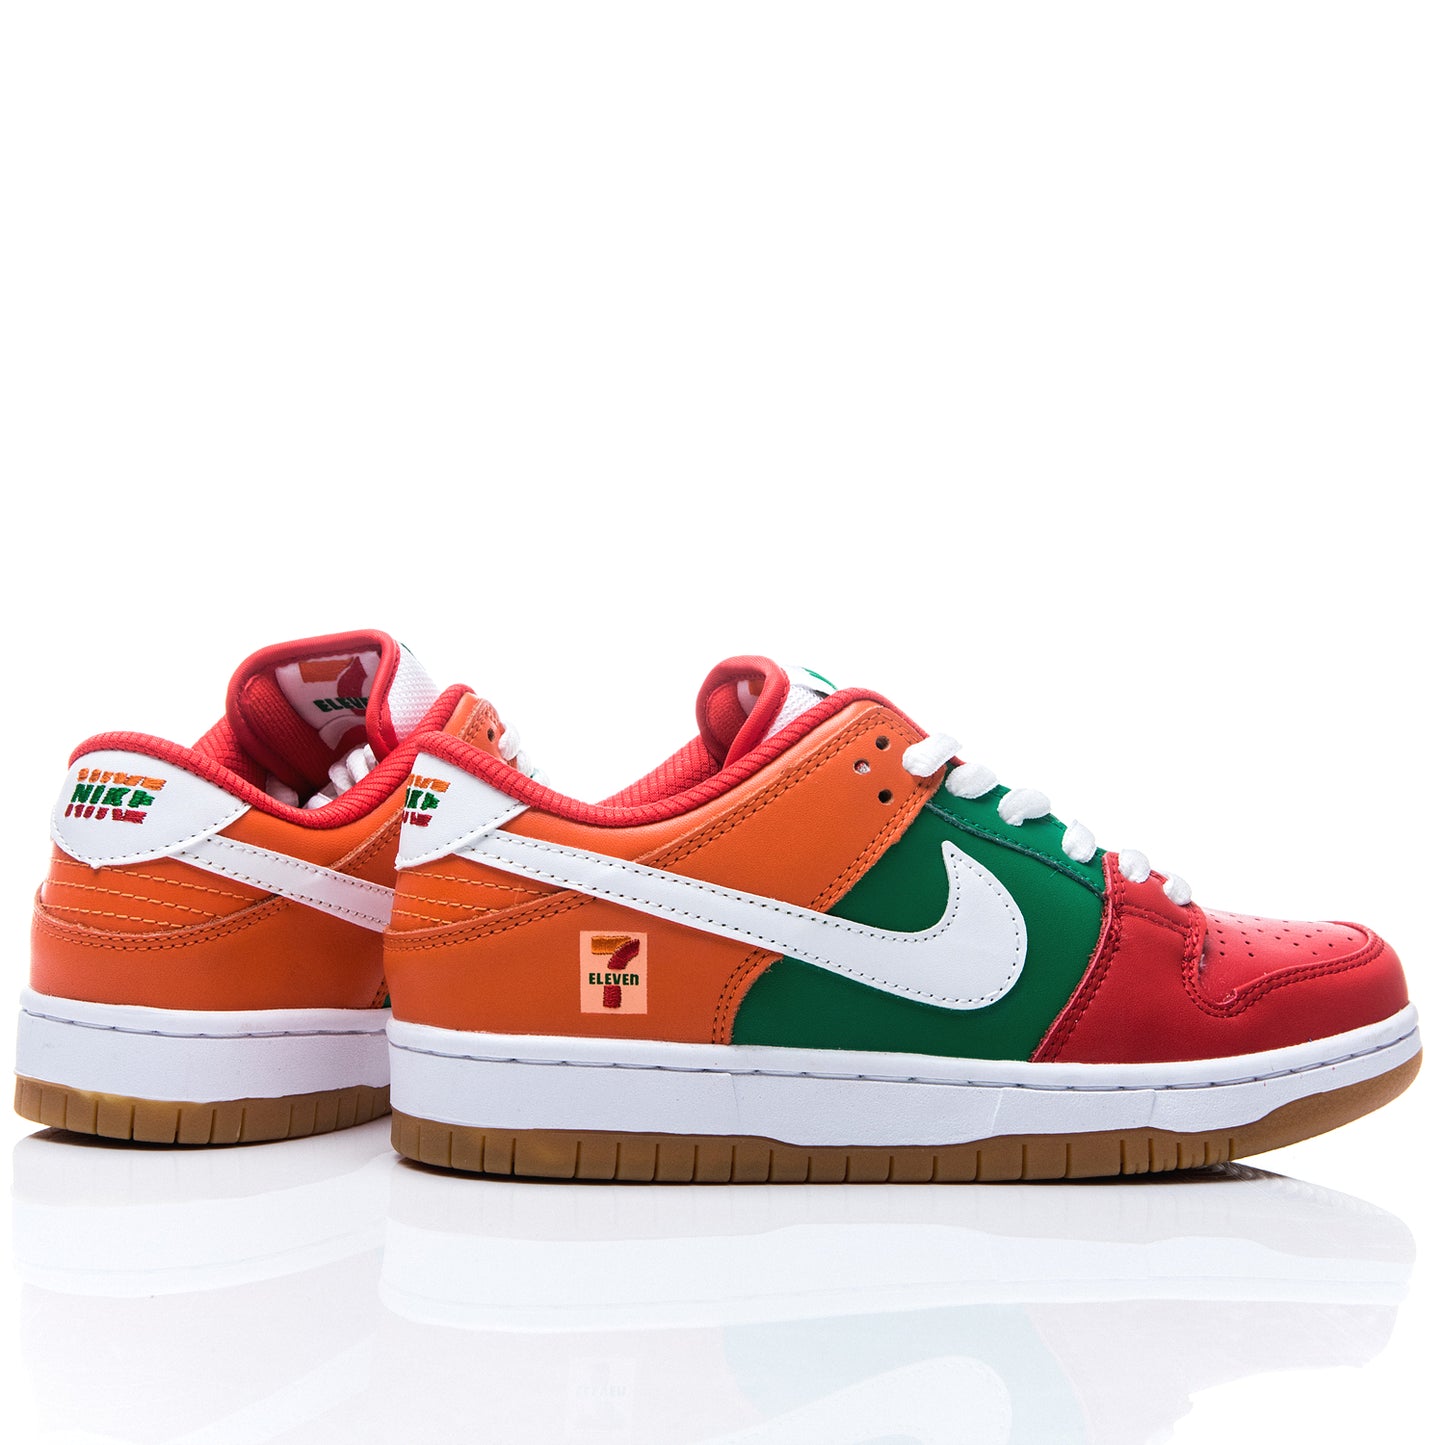 Nike Dunk SB 7/11 Limited Edition (Only 100 Around The World)